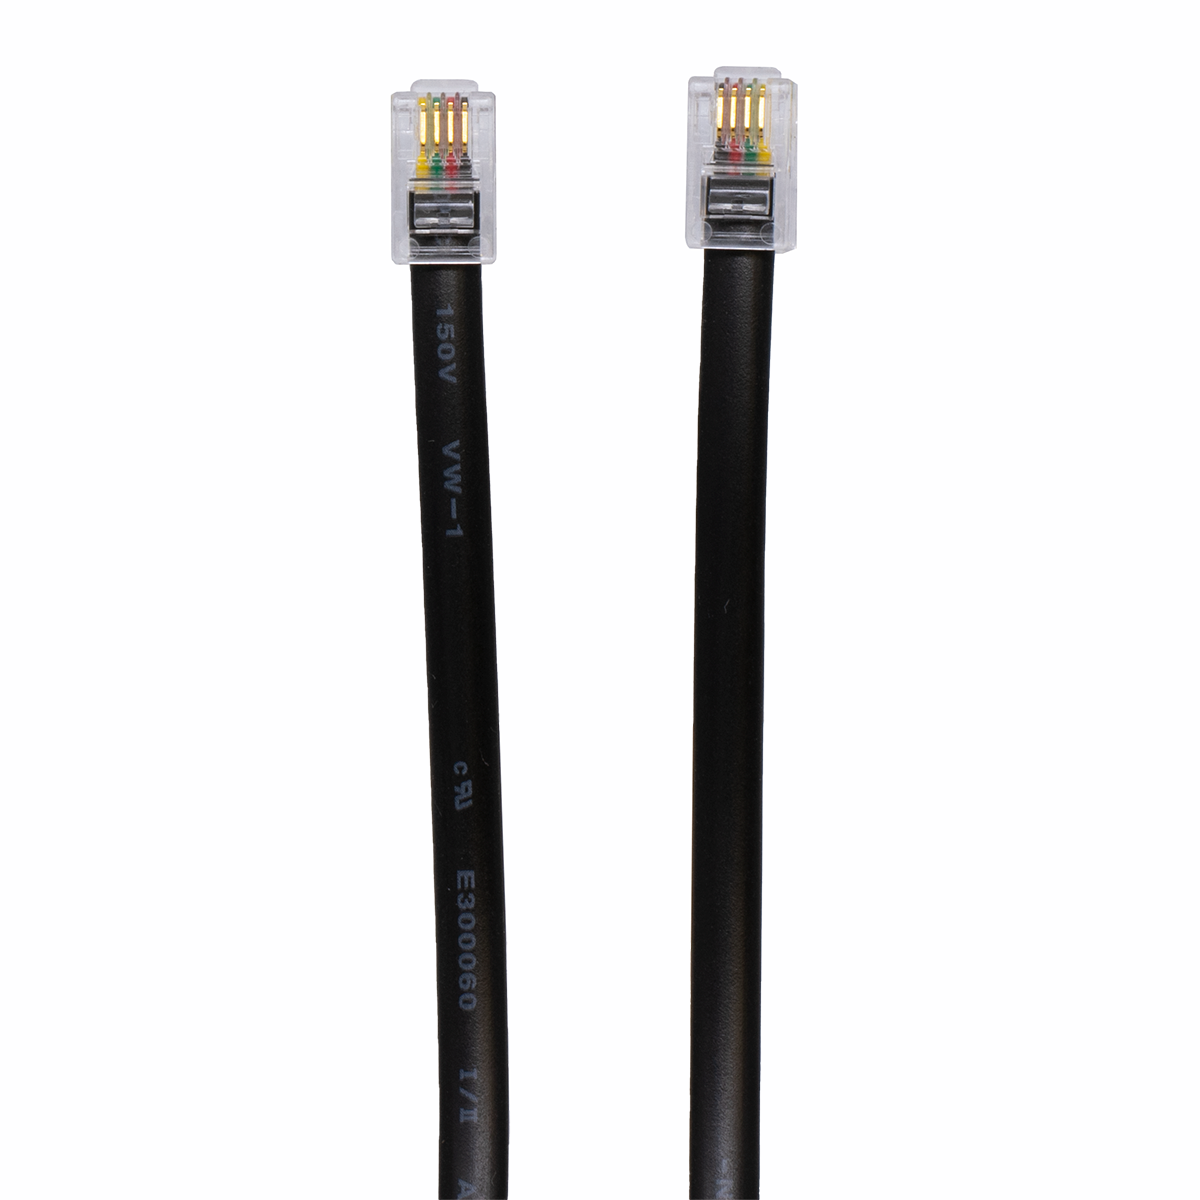 7' Straight (Non-Coiled) Black Handset Cord (Plug View)